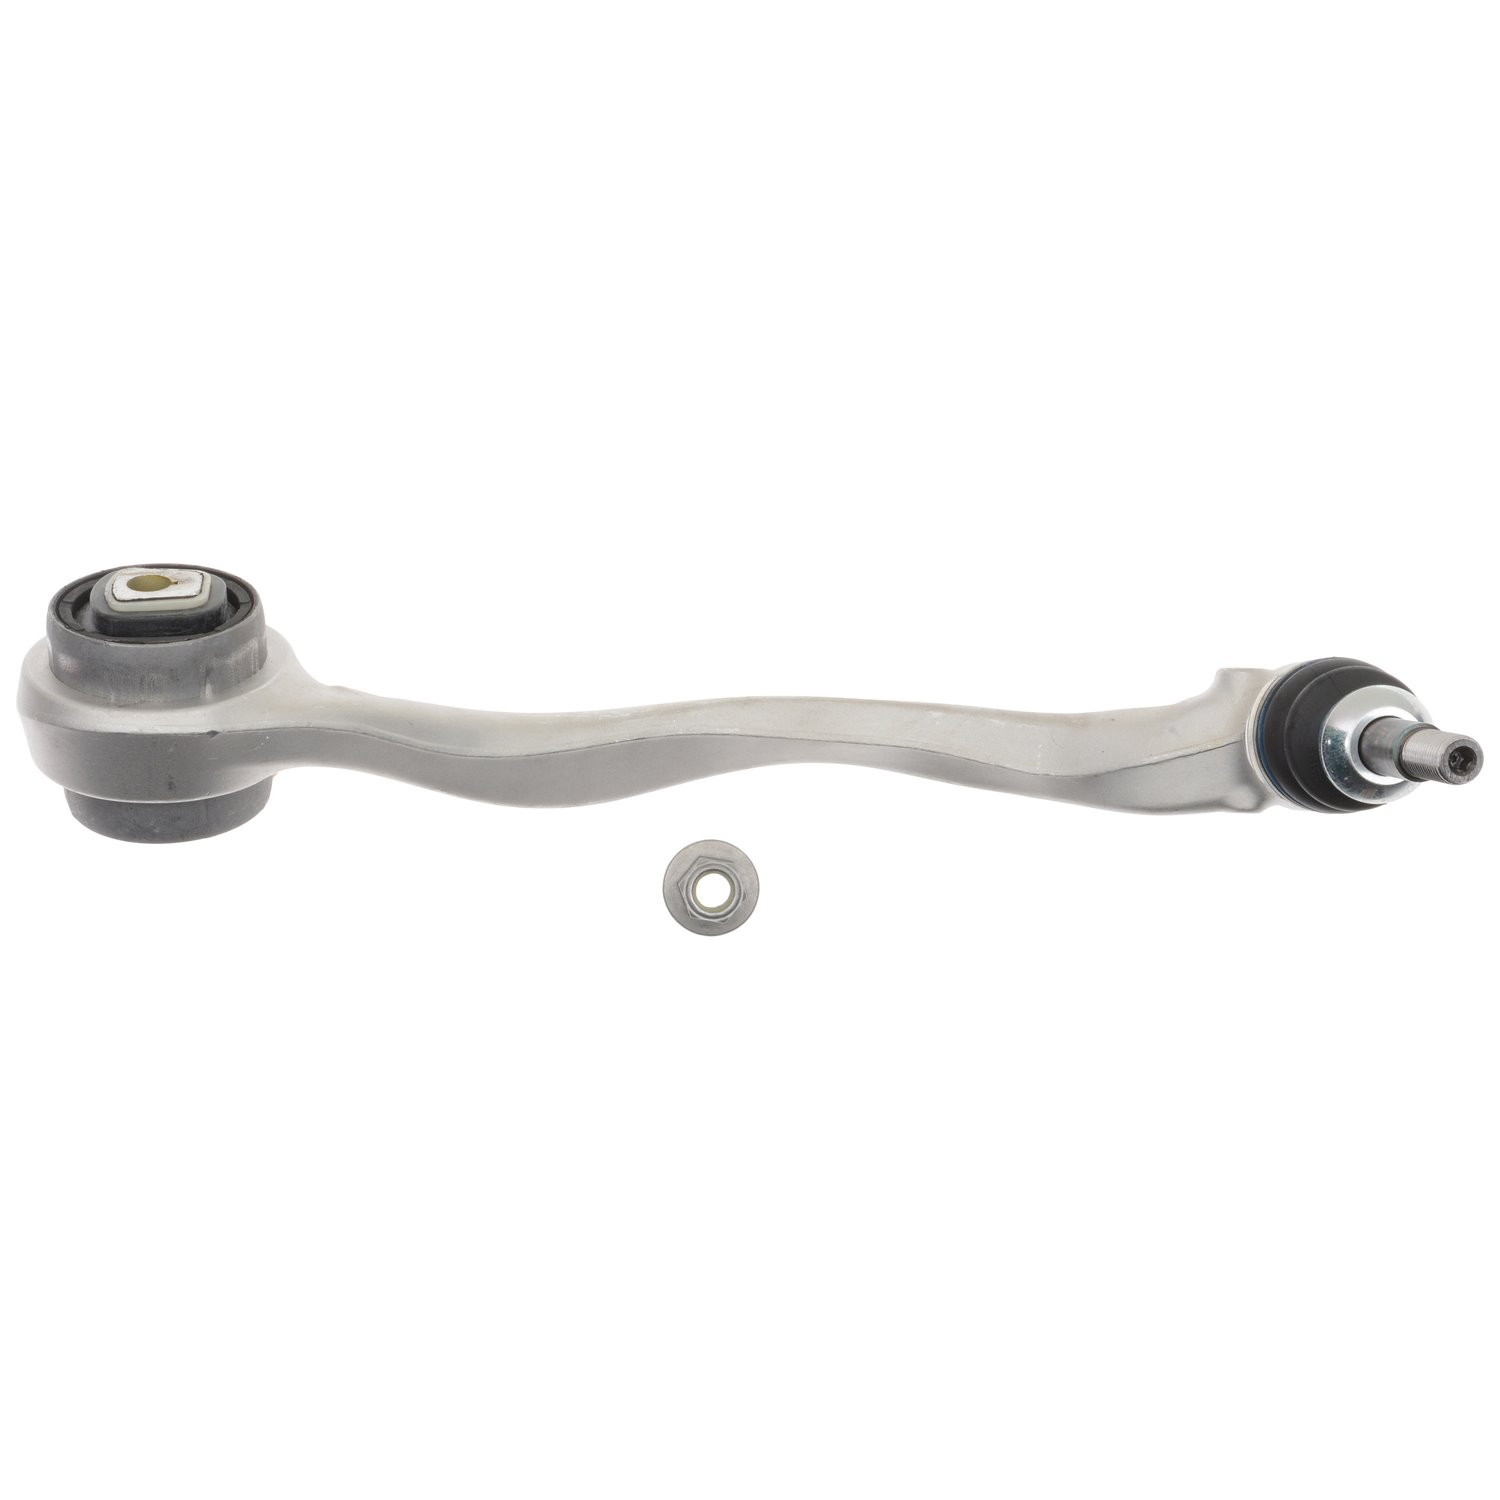 JTC2208 Control Arm Assembly Fits Select BMW Models, Front Left Lower Forward